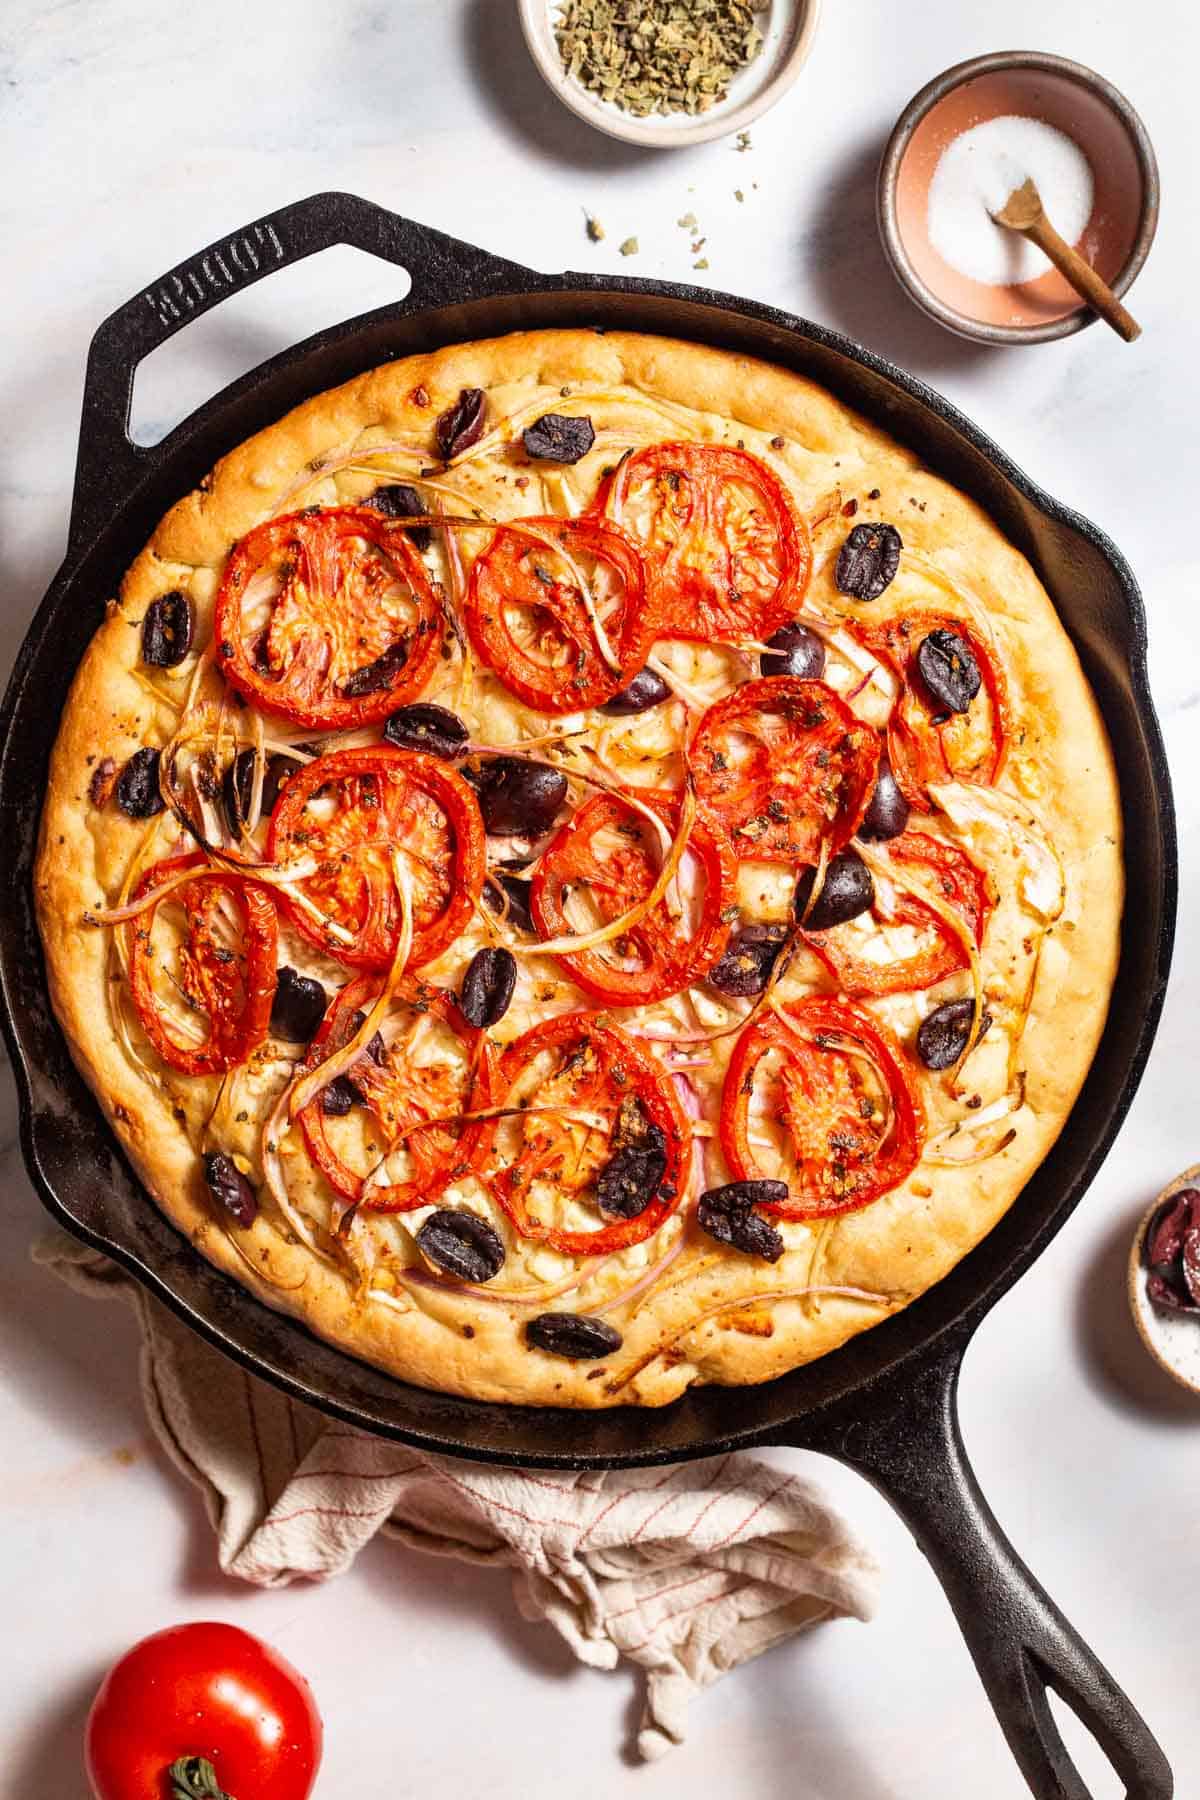 An overhead photo of greek pizza in a cast iron skillet. Surrounding this is a tomato, a kitchen towel, and small bowls of oregano and salt.